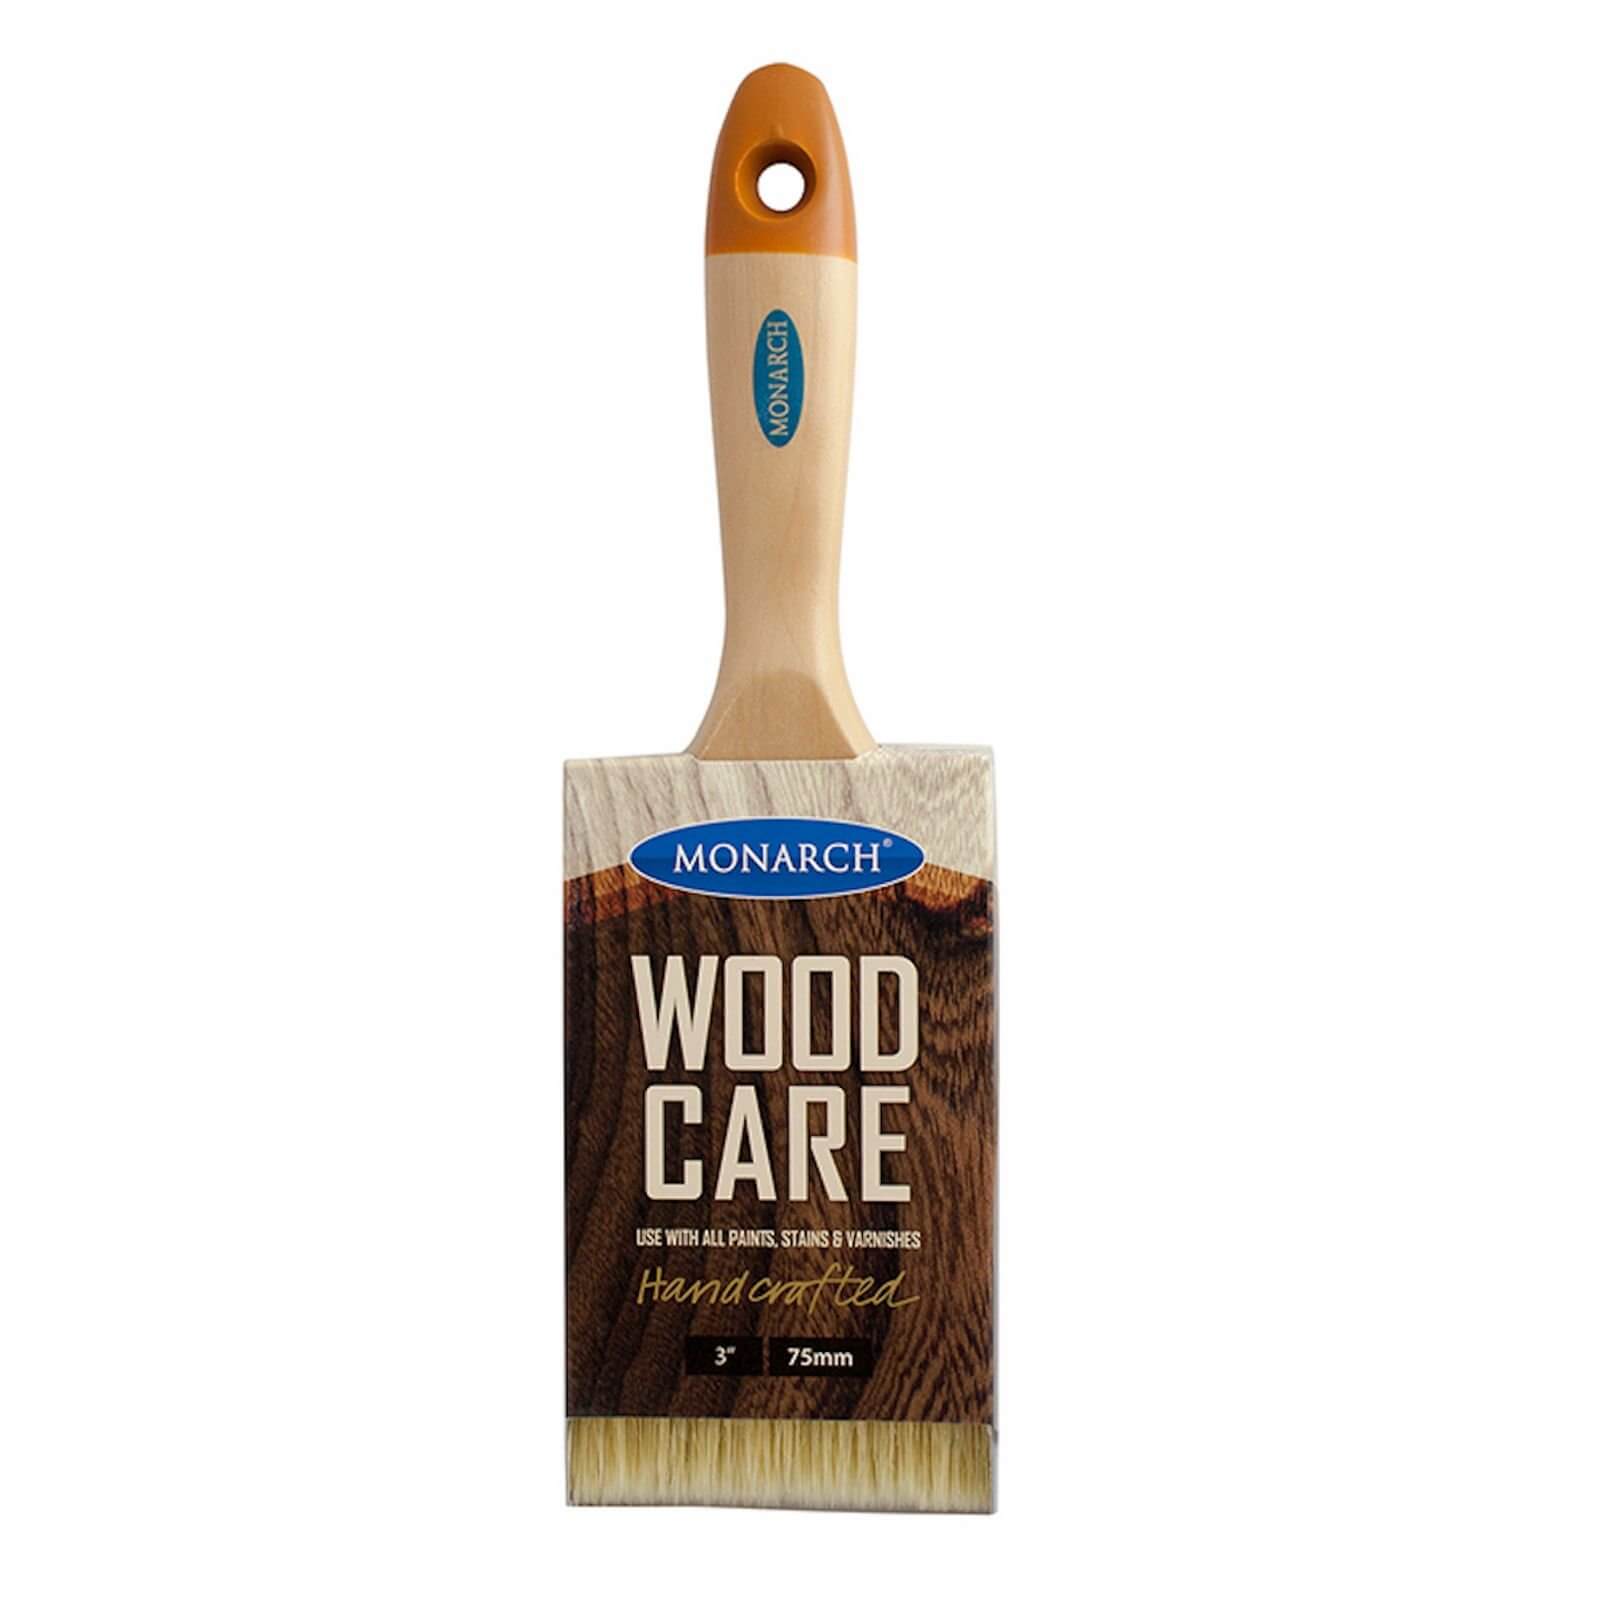 Monarch Woodcare Brush - 3in